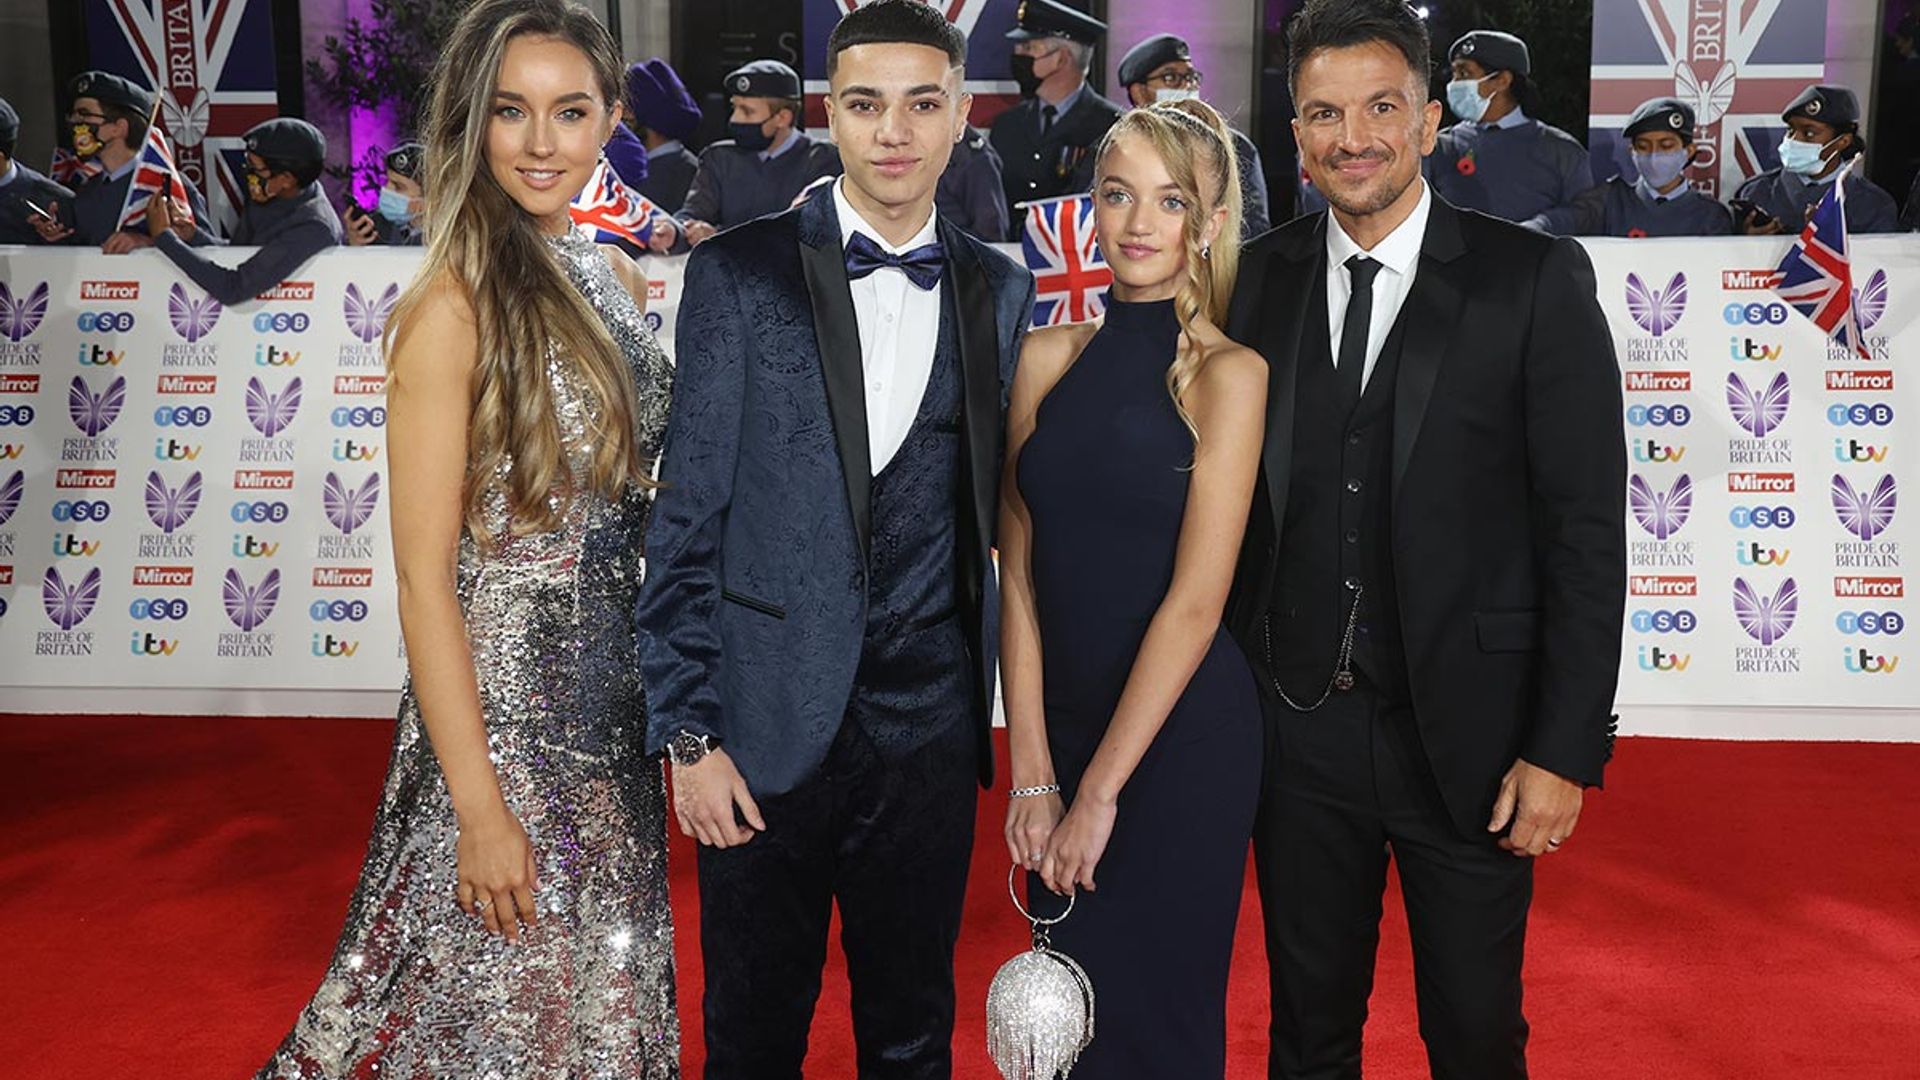 Peter Andre's daughter Princess shares sweet photo with her brother Junior – and his reaction is the best